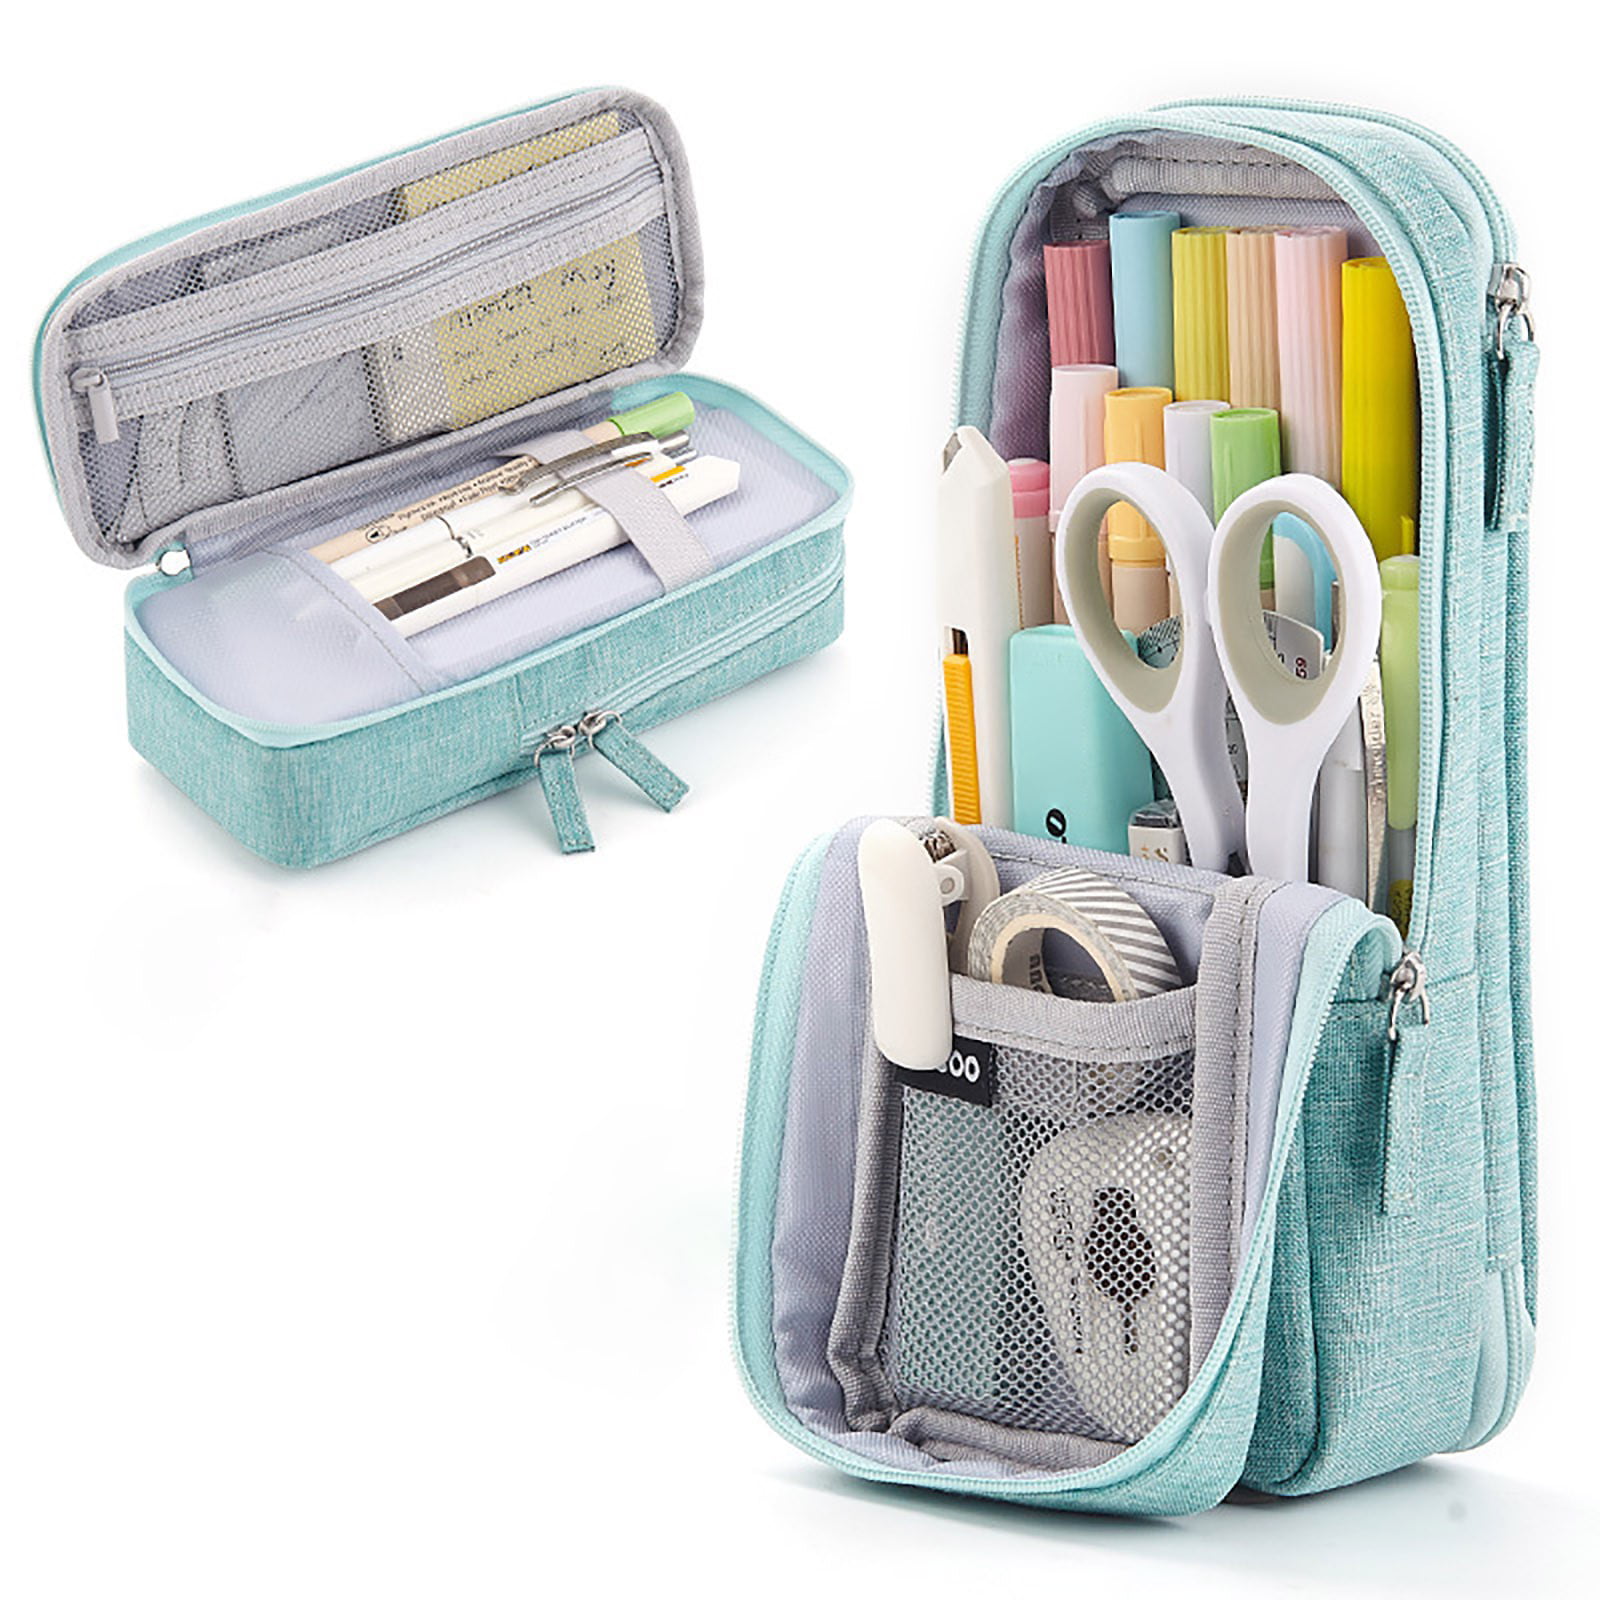  EOOUT Large Capacity Pencil Case Pencil Pouch Box, Big  Organized Pencil Bag with Handle Cute Cosmetic Bag for College Middle  School Travel Office Supllies Organizer (Grey) : Office Products